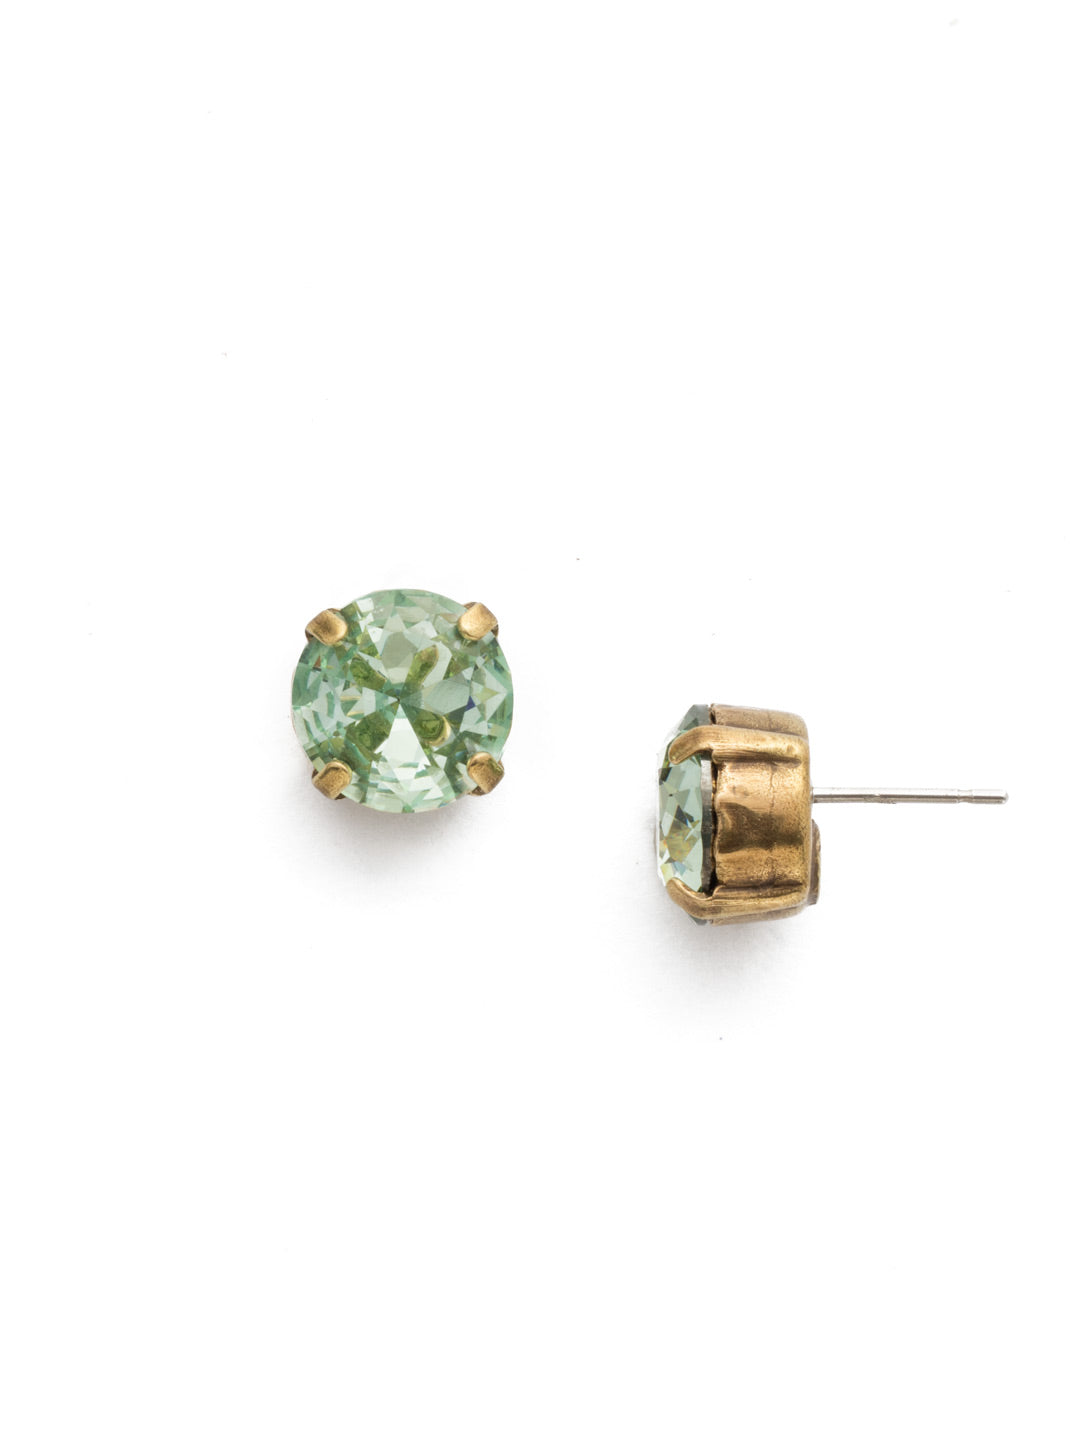 London Stud Earrings - ECM14AGMIN - <p>Everyone needs a great pair of studs. Add some classic sparkle to any occasion with these stud earrings. Need help picking a stud? <a href="https://www.sorrelli.com/blogs/sisterhood/round-stud-earrings-101-a-rundown-of-sizes-styles-and-sparkle">Check out our size guide!</a> From Sorrelli's Mint collection in our Antique Gold-tone finish.</p>